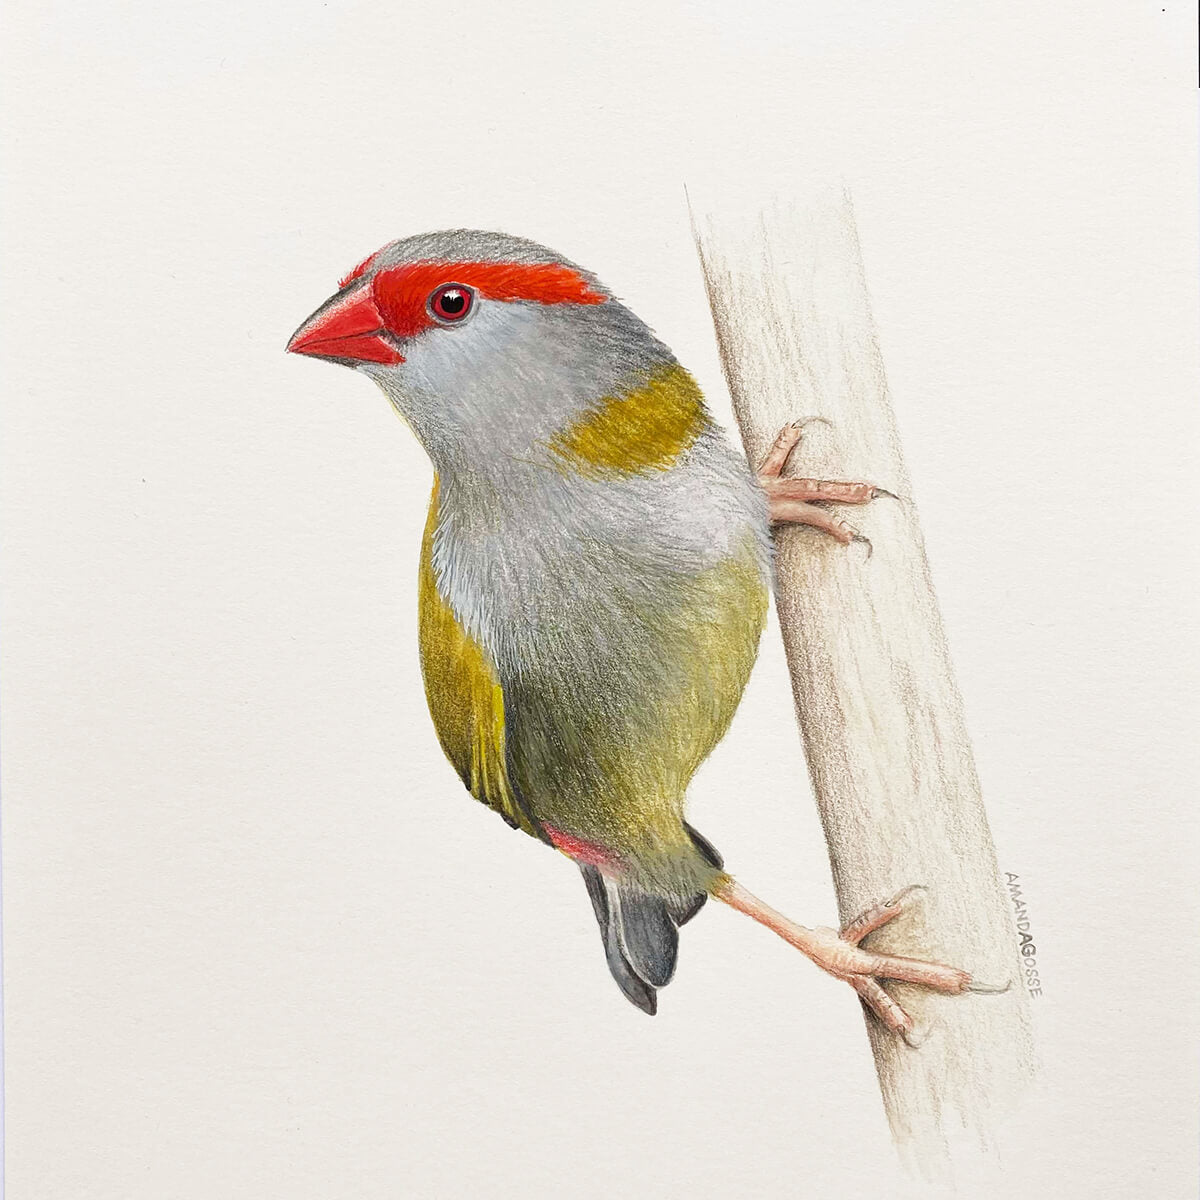 Original gouache on paper painting of a red-browed finch bird by artist Amanda Gosse